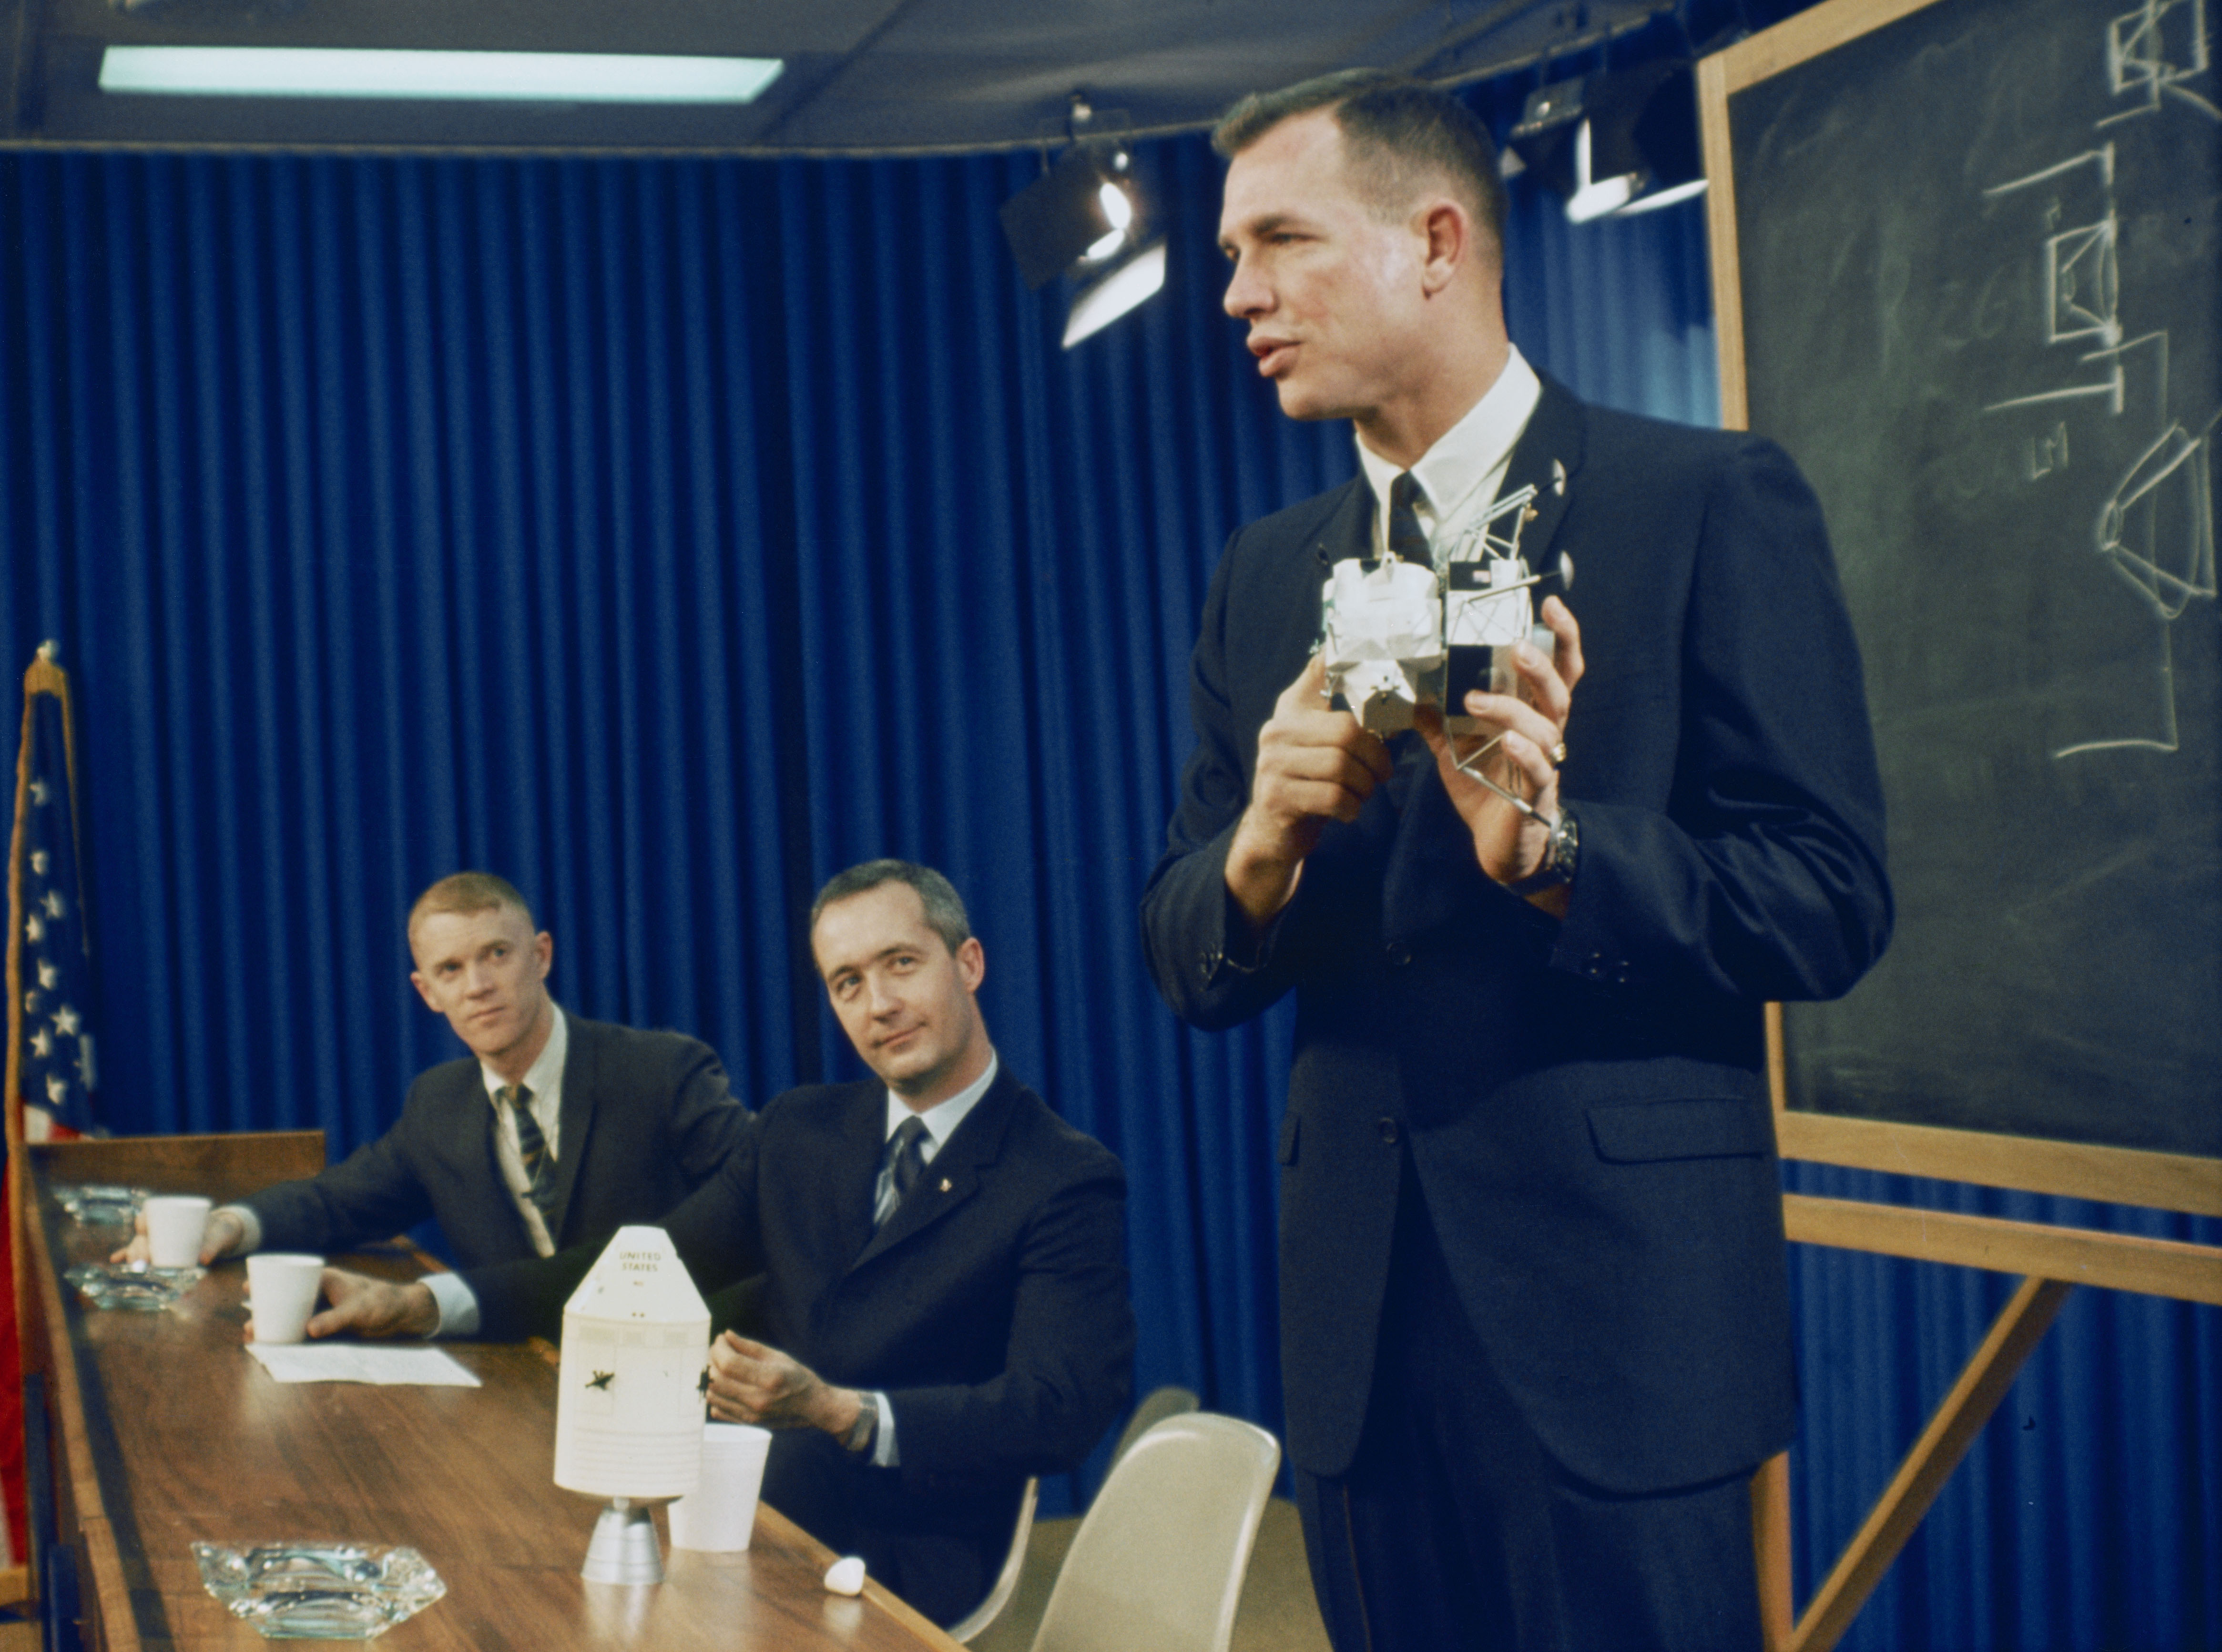 Apollo 9 astronauts Russell L. Schweickart, left, James A. McDivitt, and David R. Scott during the preflight crew press conference at the Manned Spacecraft Center (MSC), now NASA’s Johnson Space Center in Houston